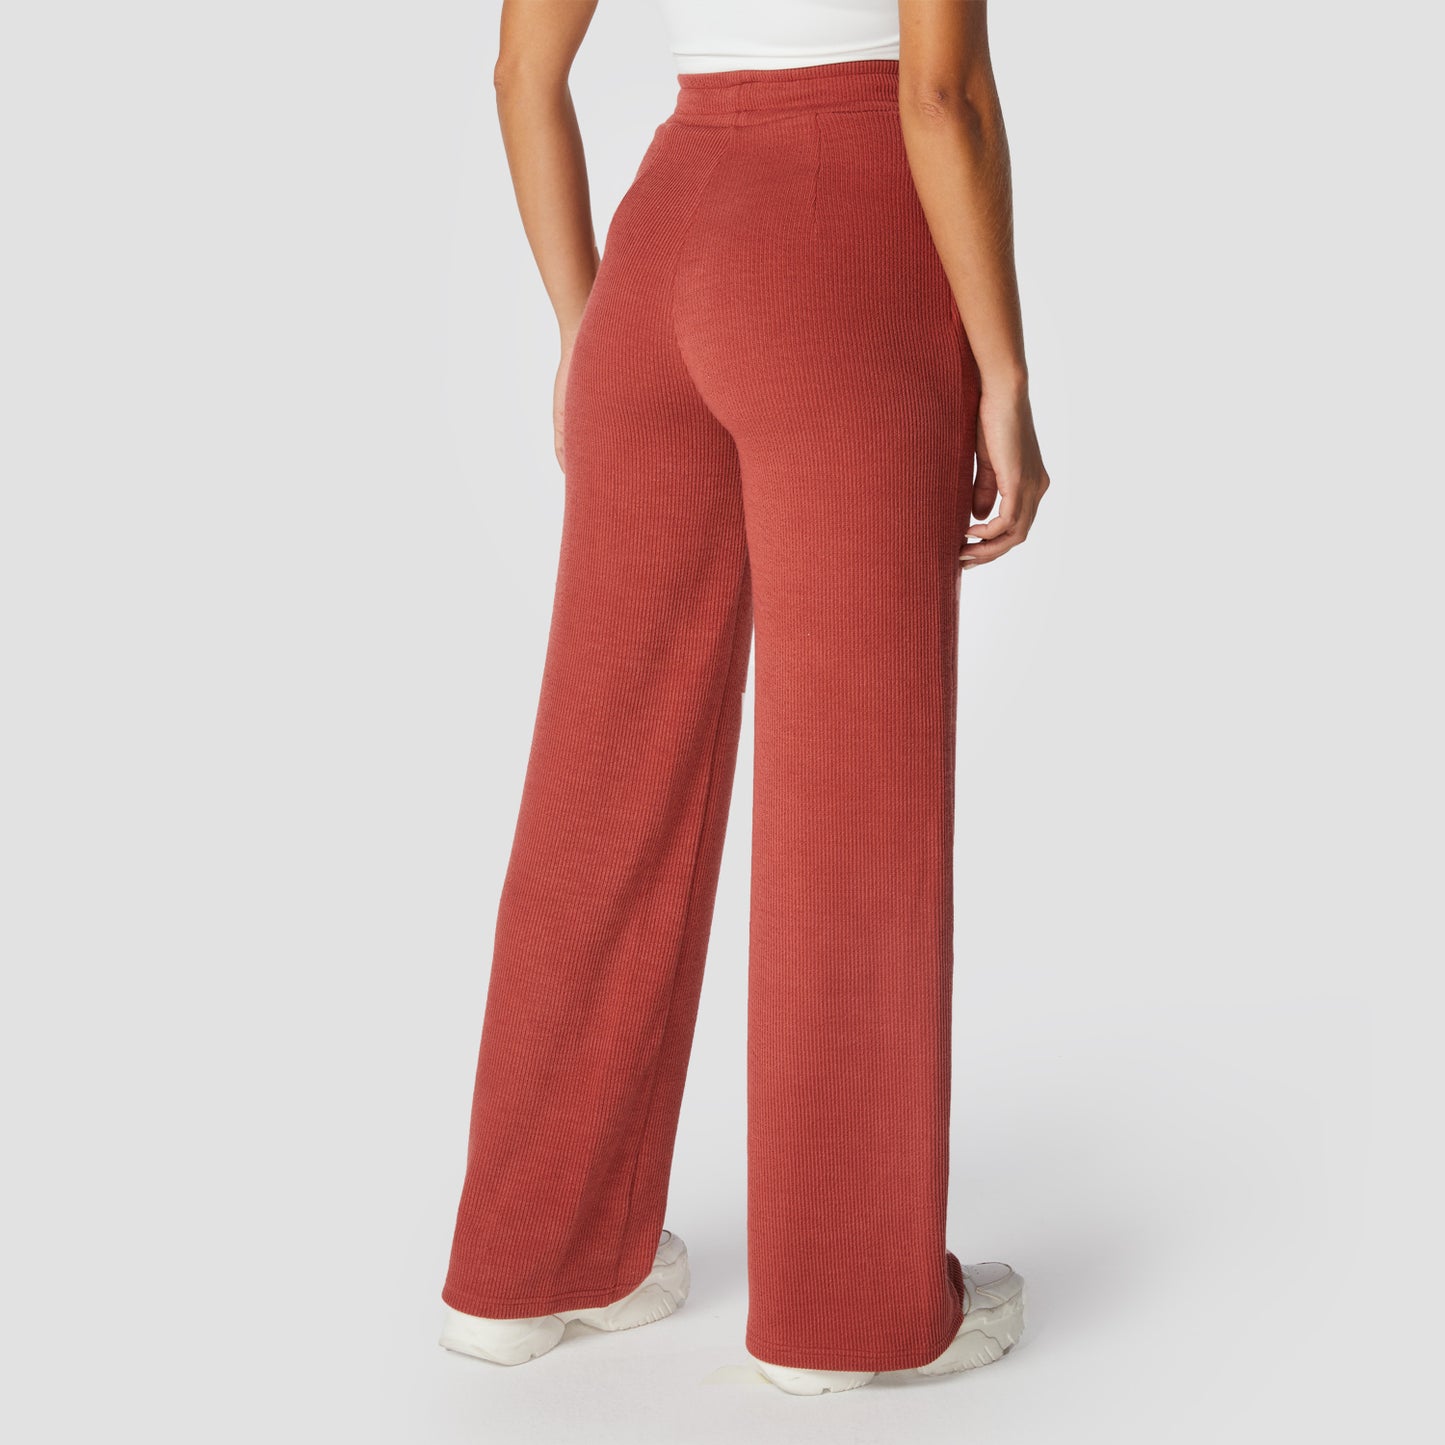 squatwolf-gym-pants-for-women-luxe-wide-leg-pants-baby-red-workout-clothes